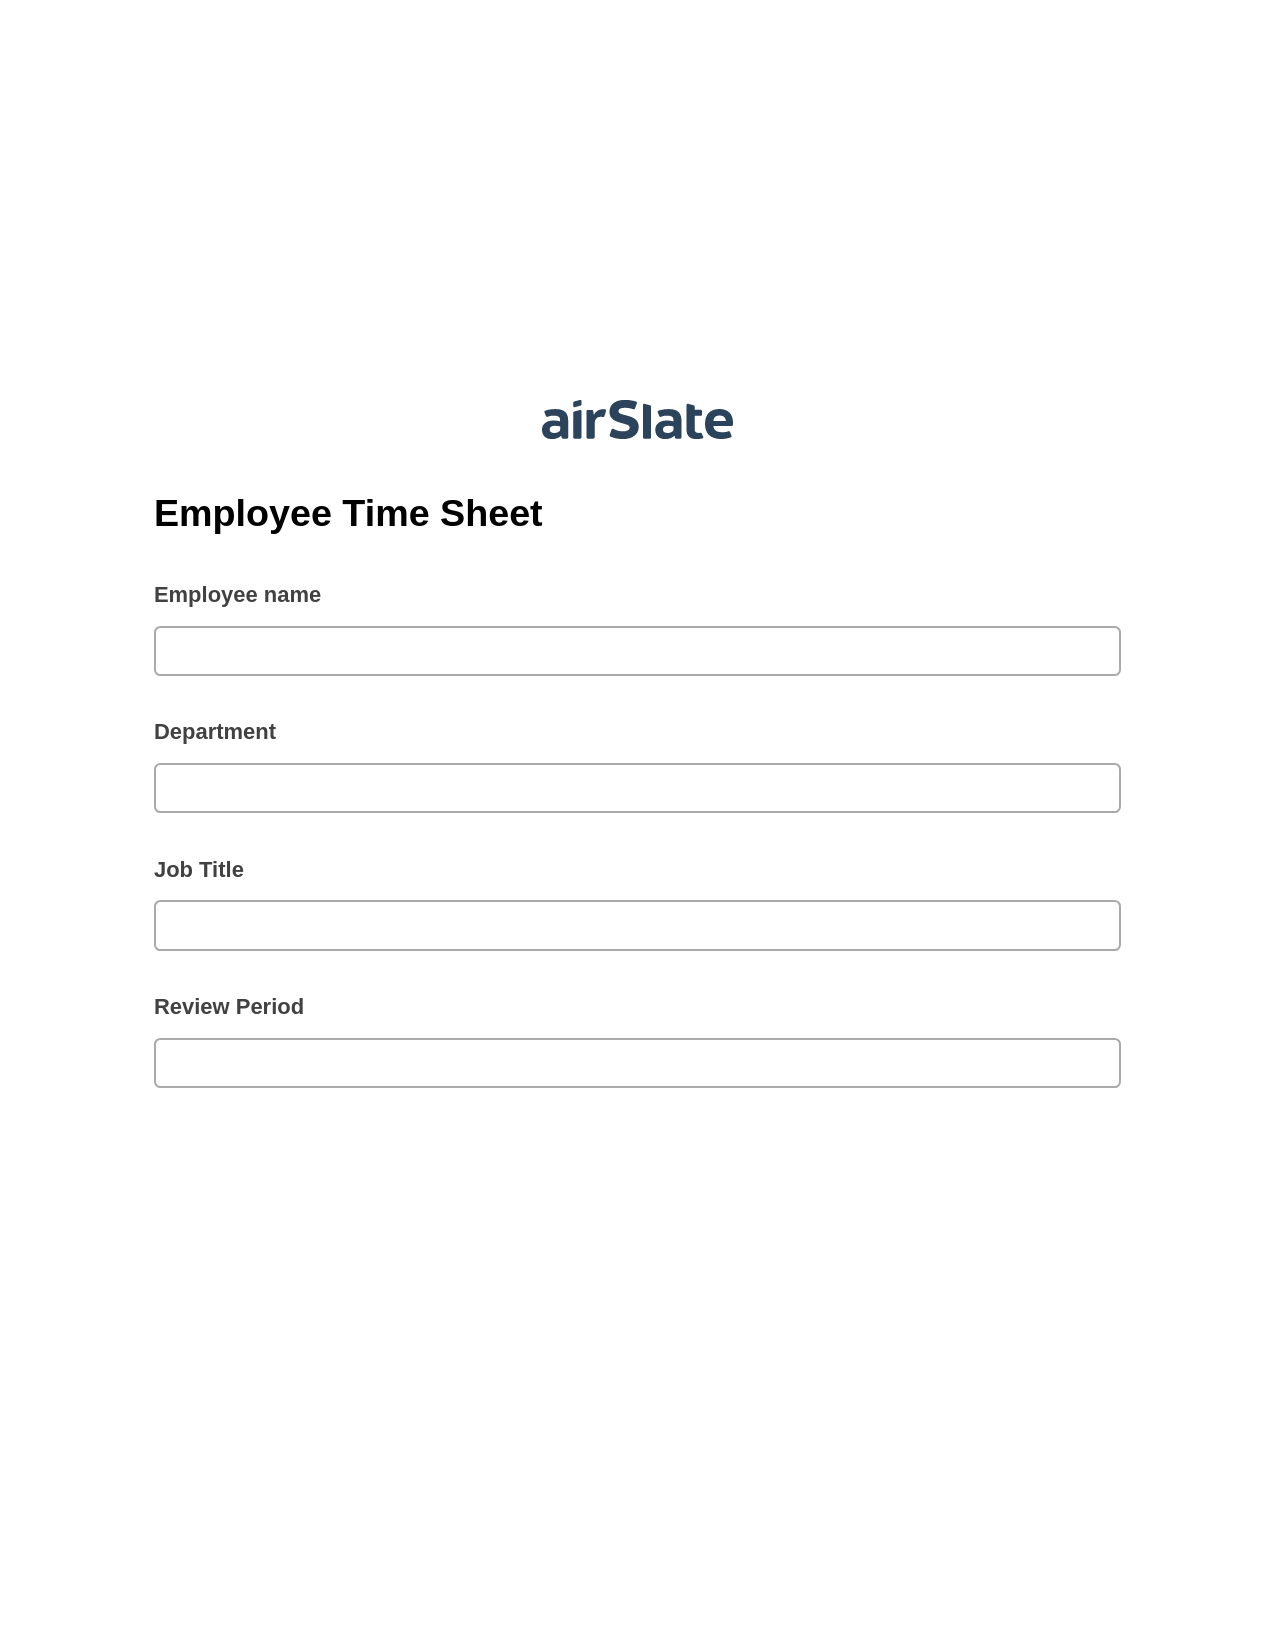 Employee Time Sheet Pre-fill from MS Dynamics 365 Records, Update Audit Trail Bot, Export to Smartsheet